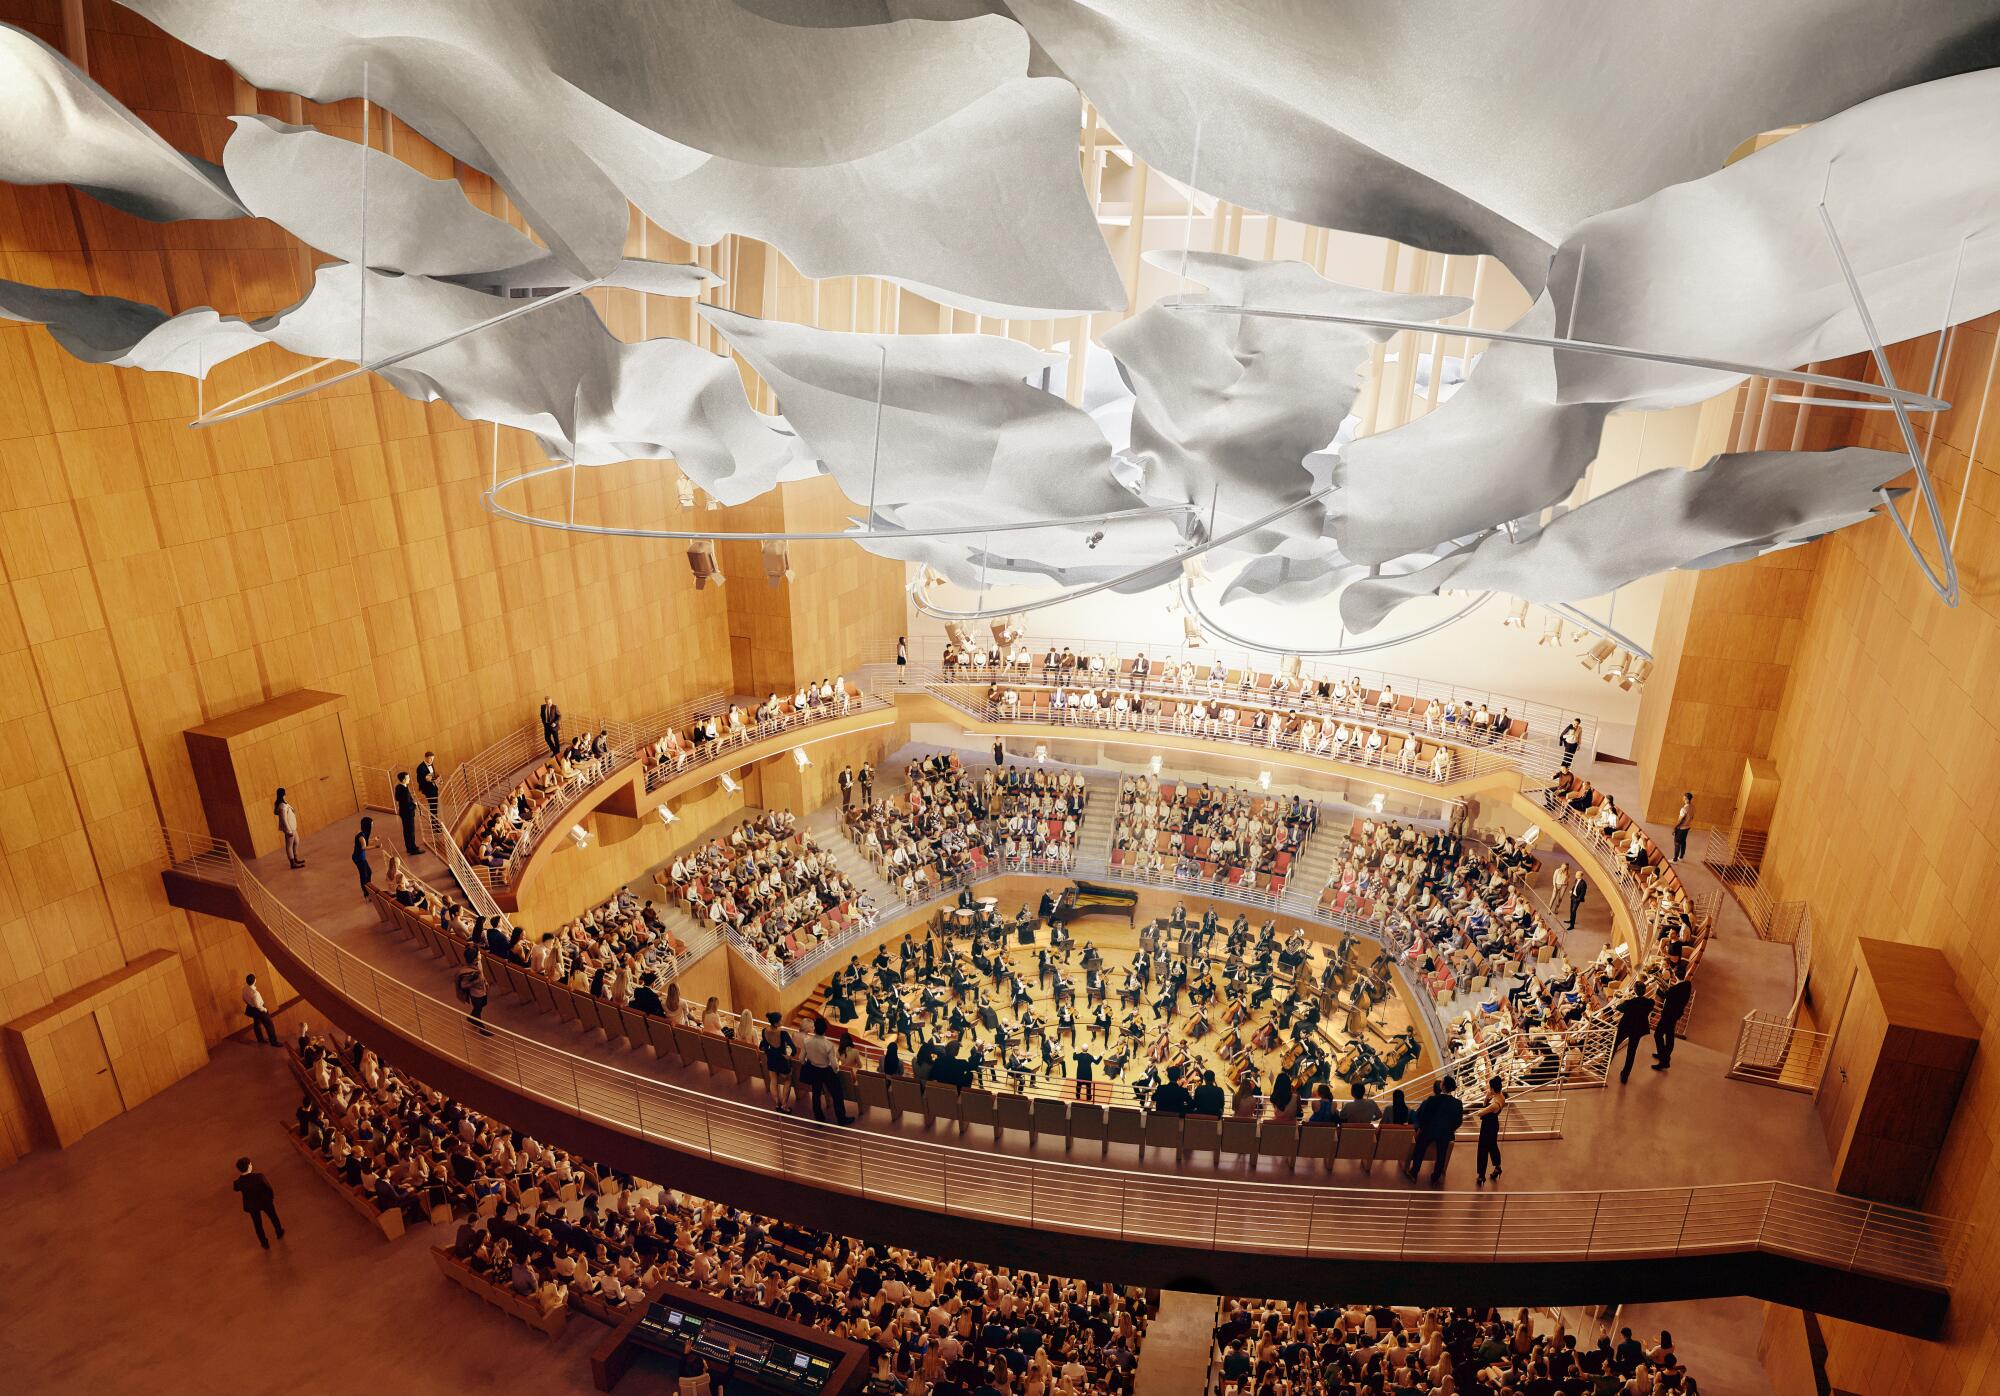  An artist's rendering of the interior of the concert hall in the Colburn Center.